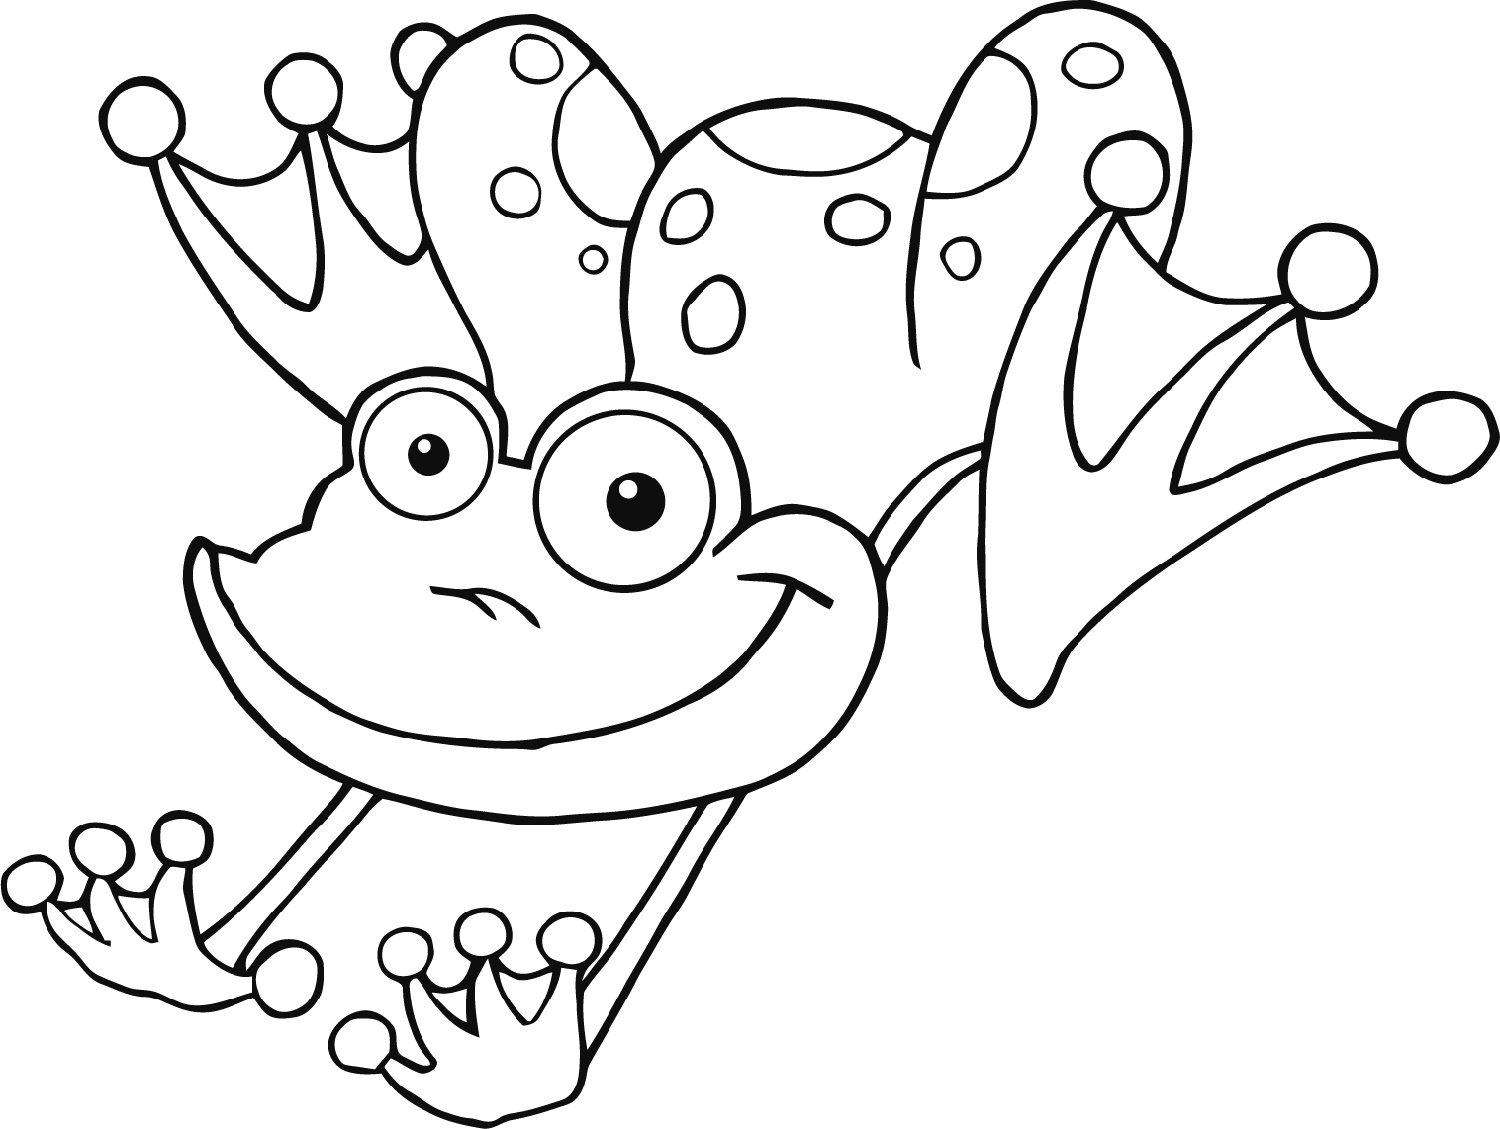 Frog Coloring Pages For Kids